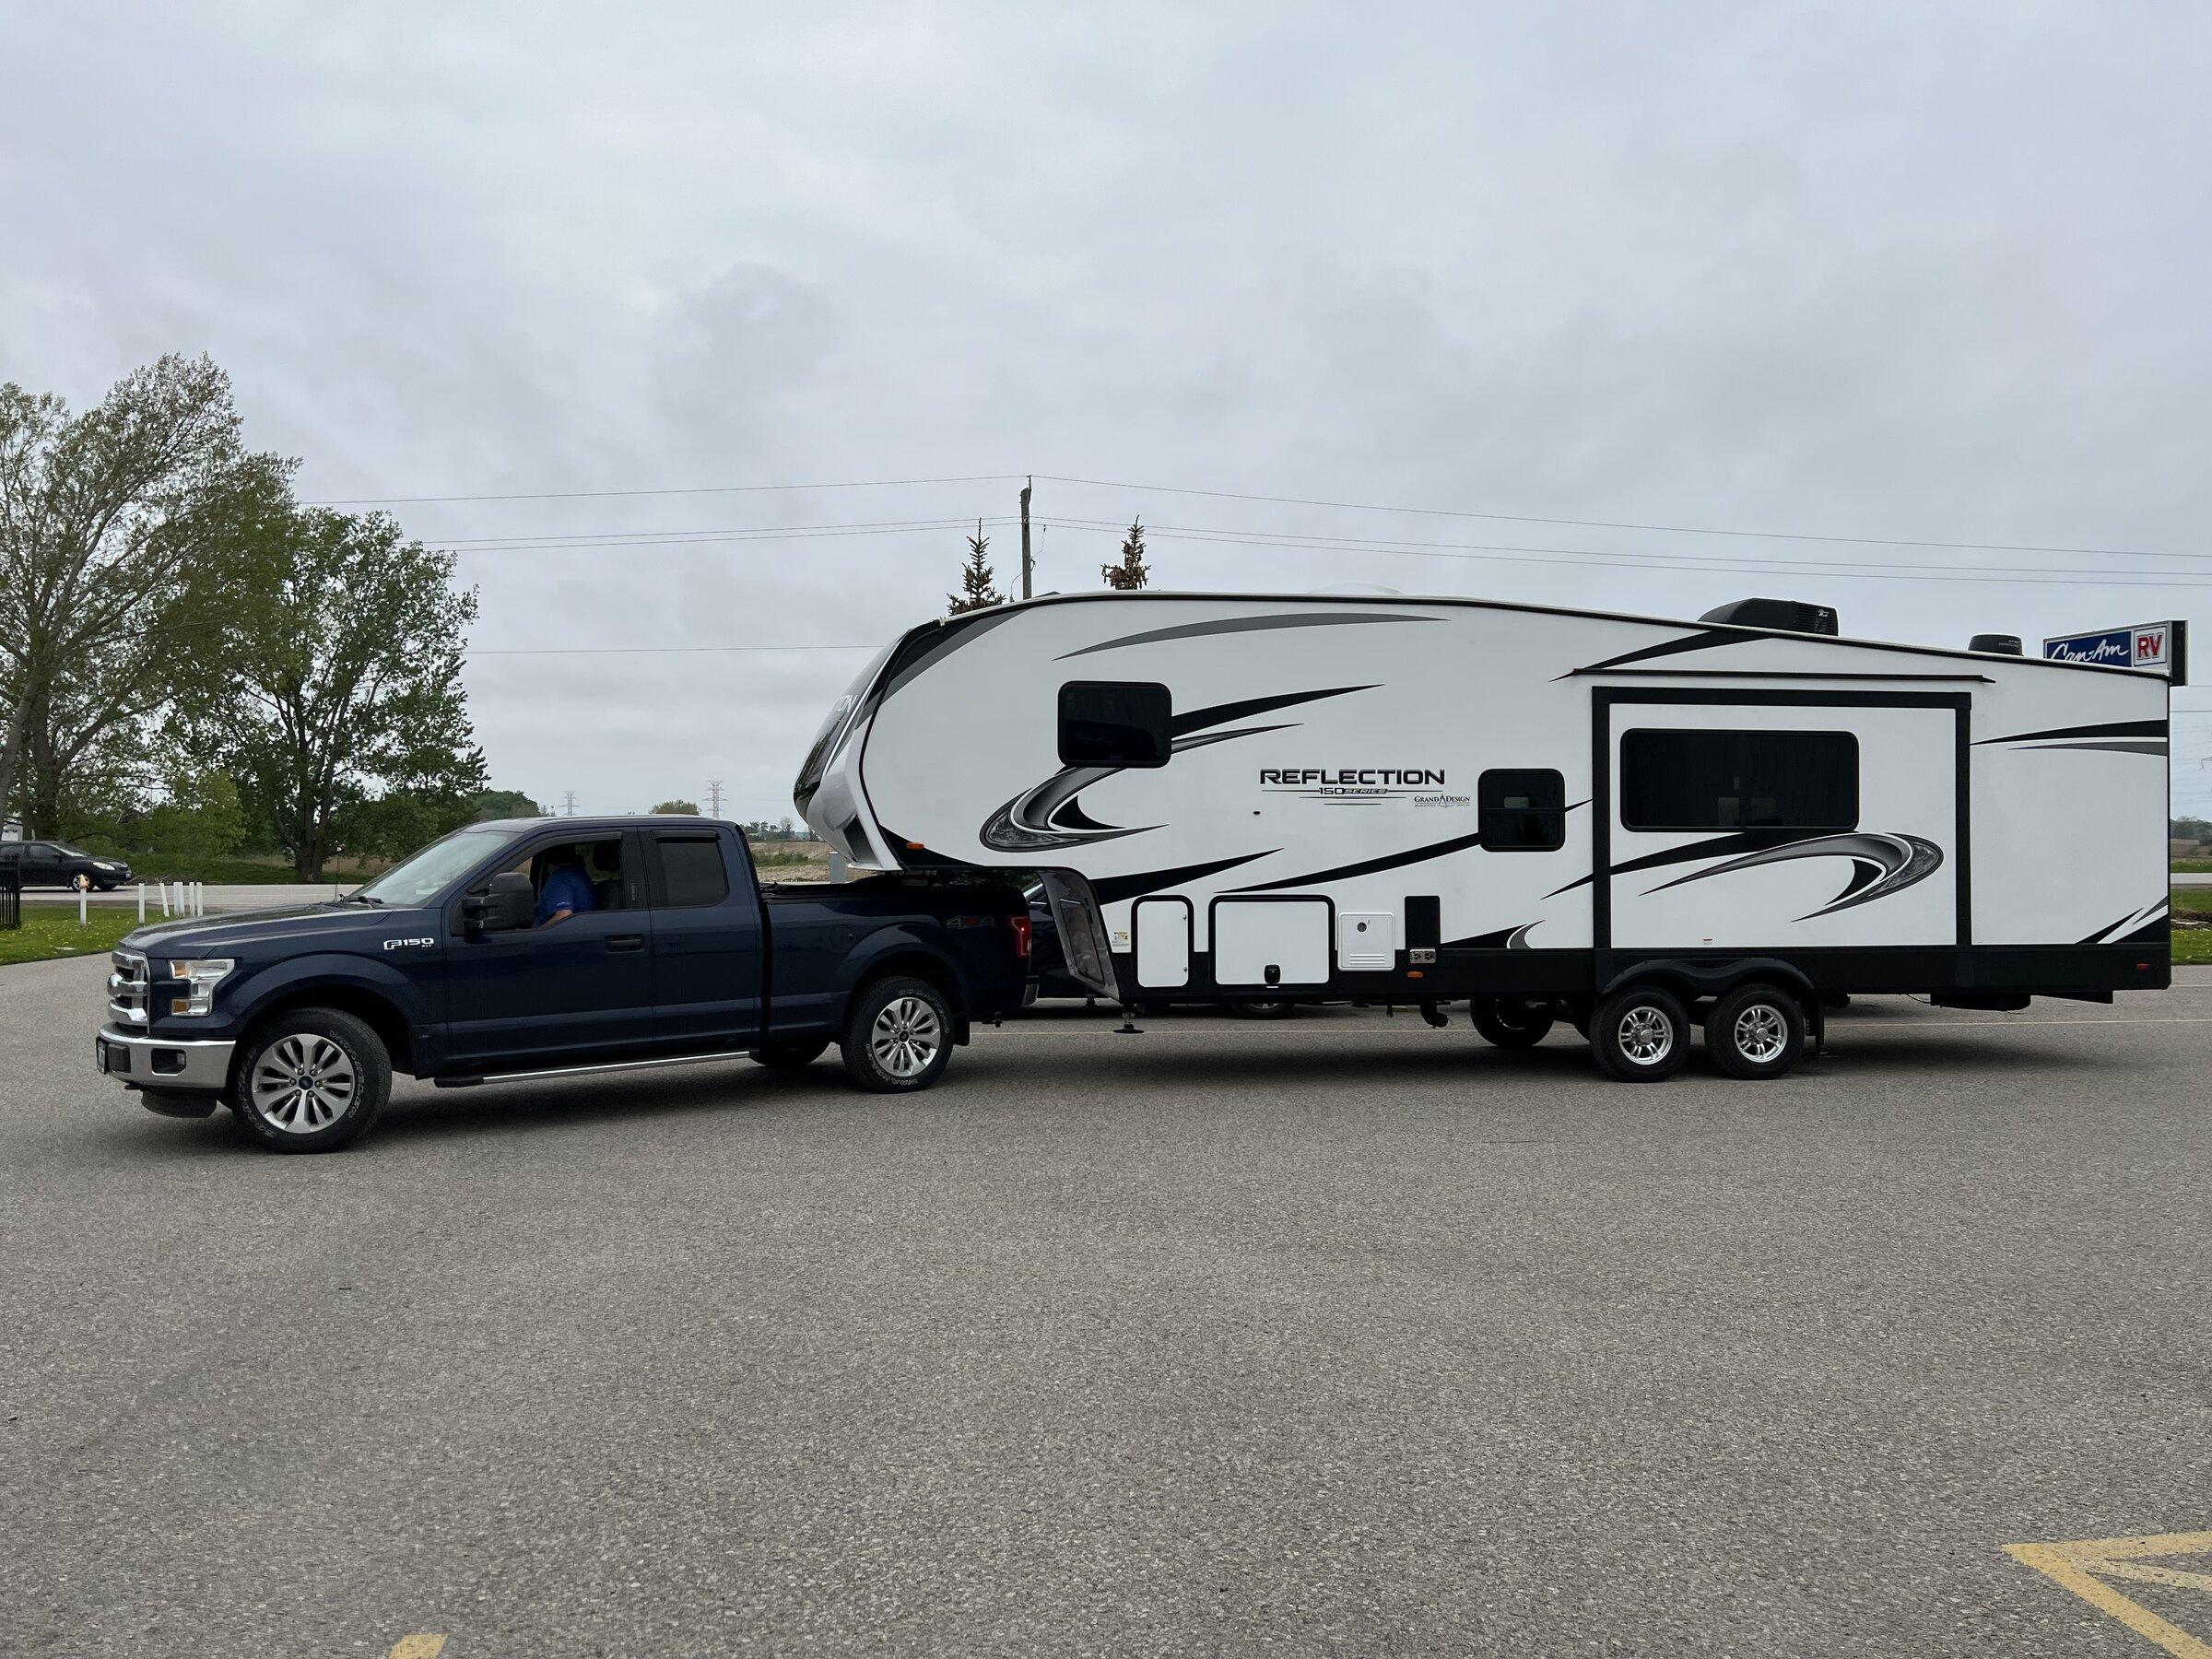 Ford F-150 Lightning Fifth Wheel towing with the Lightning CBC7AAA1-0097-4D6E-B6E1-1353066C5EF7